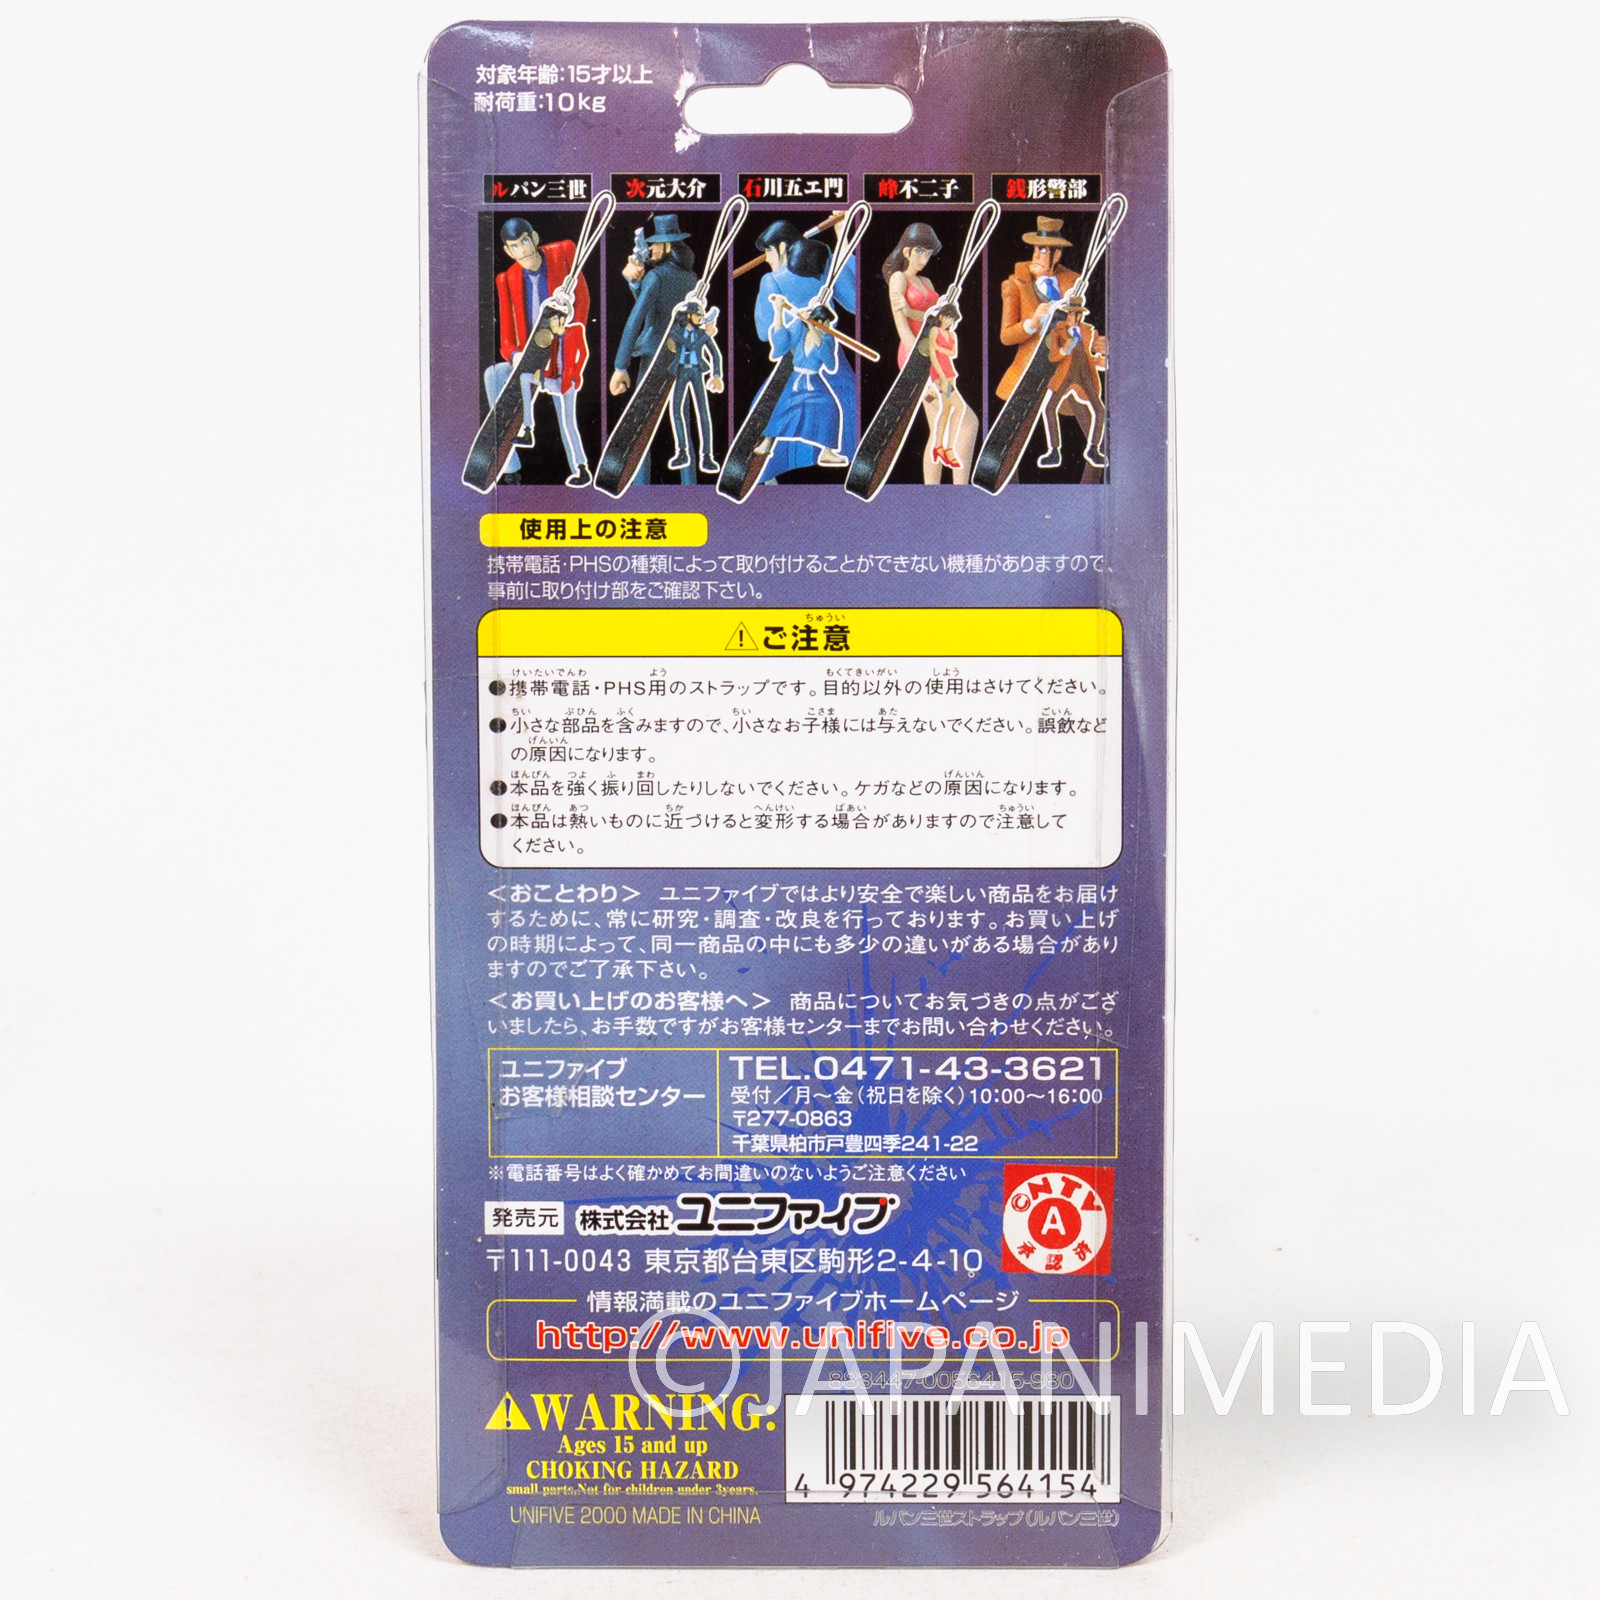 Lupin the Third (3rd) LUPIN Belt & Figure Strap JAPAN ANIME 